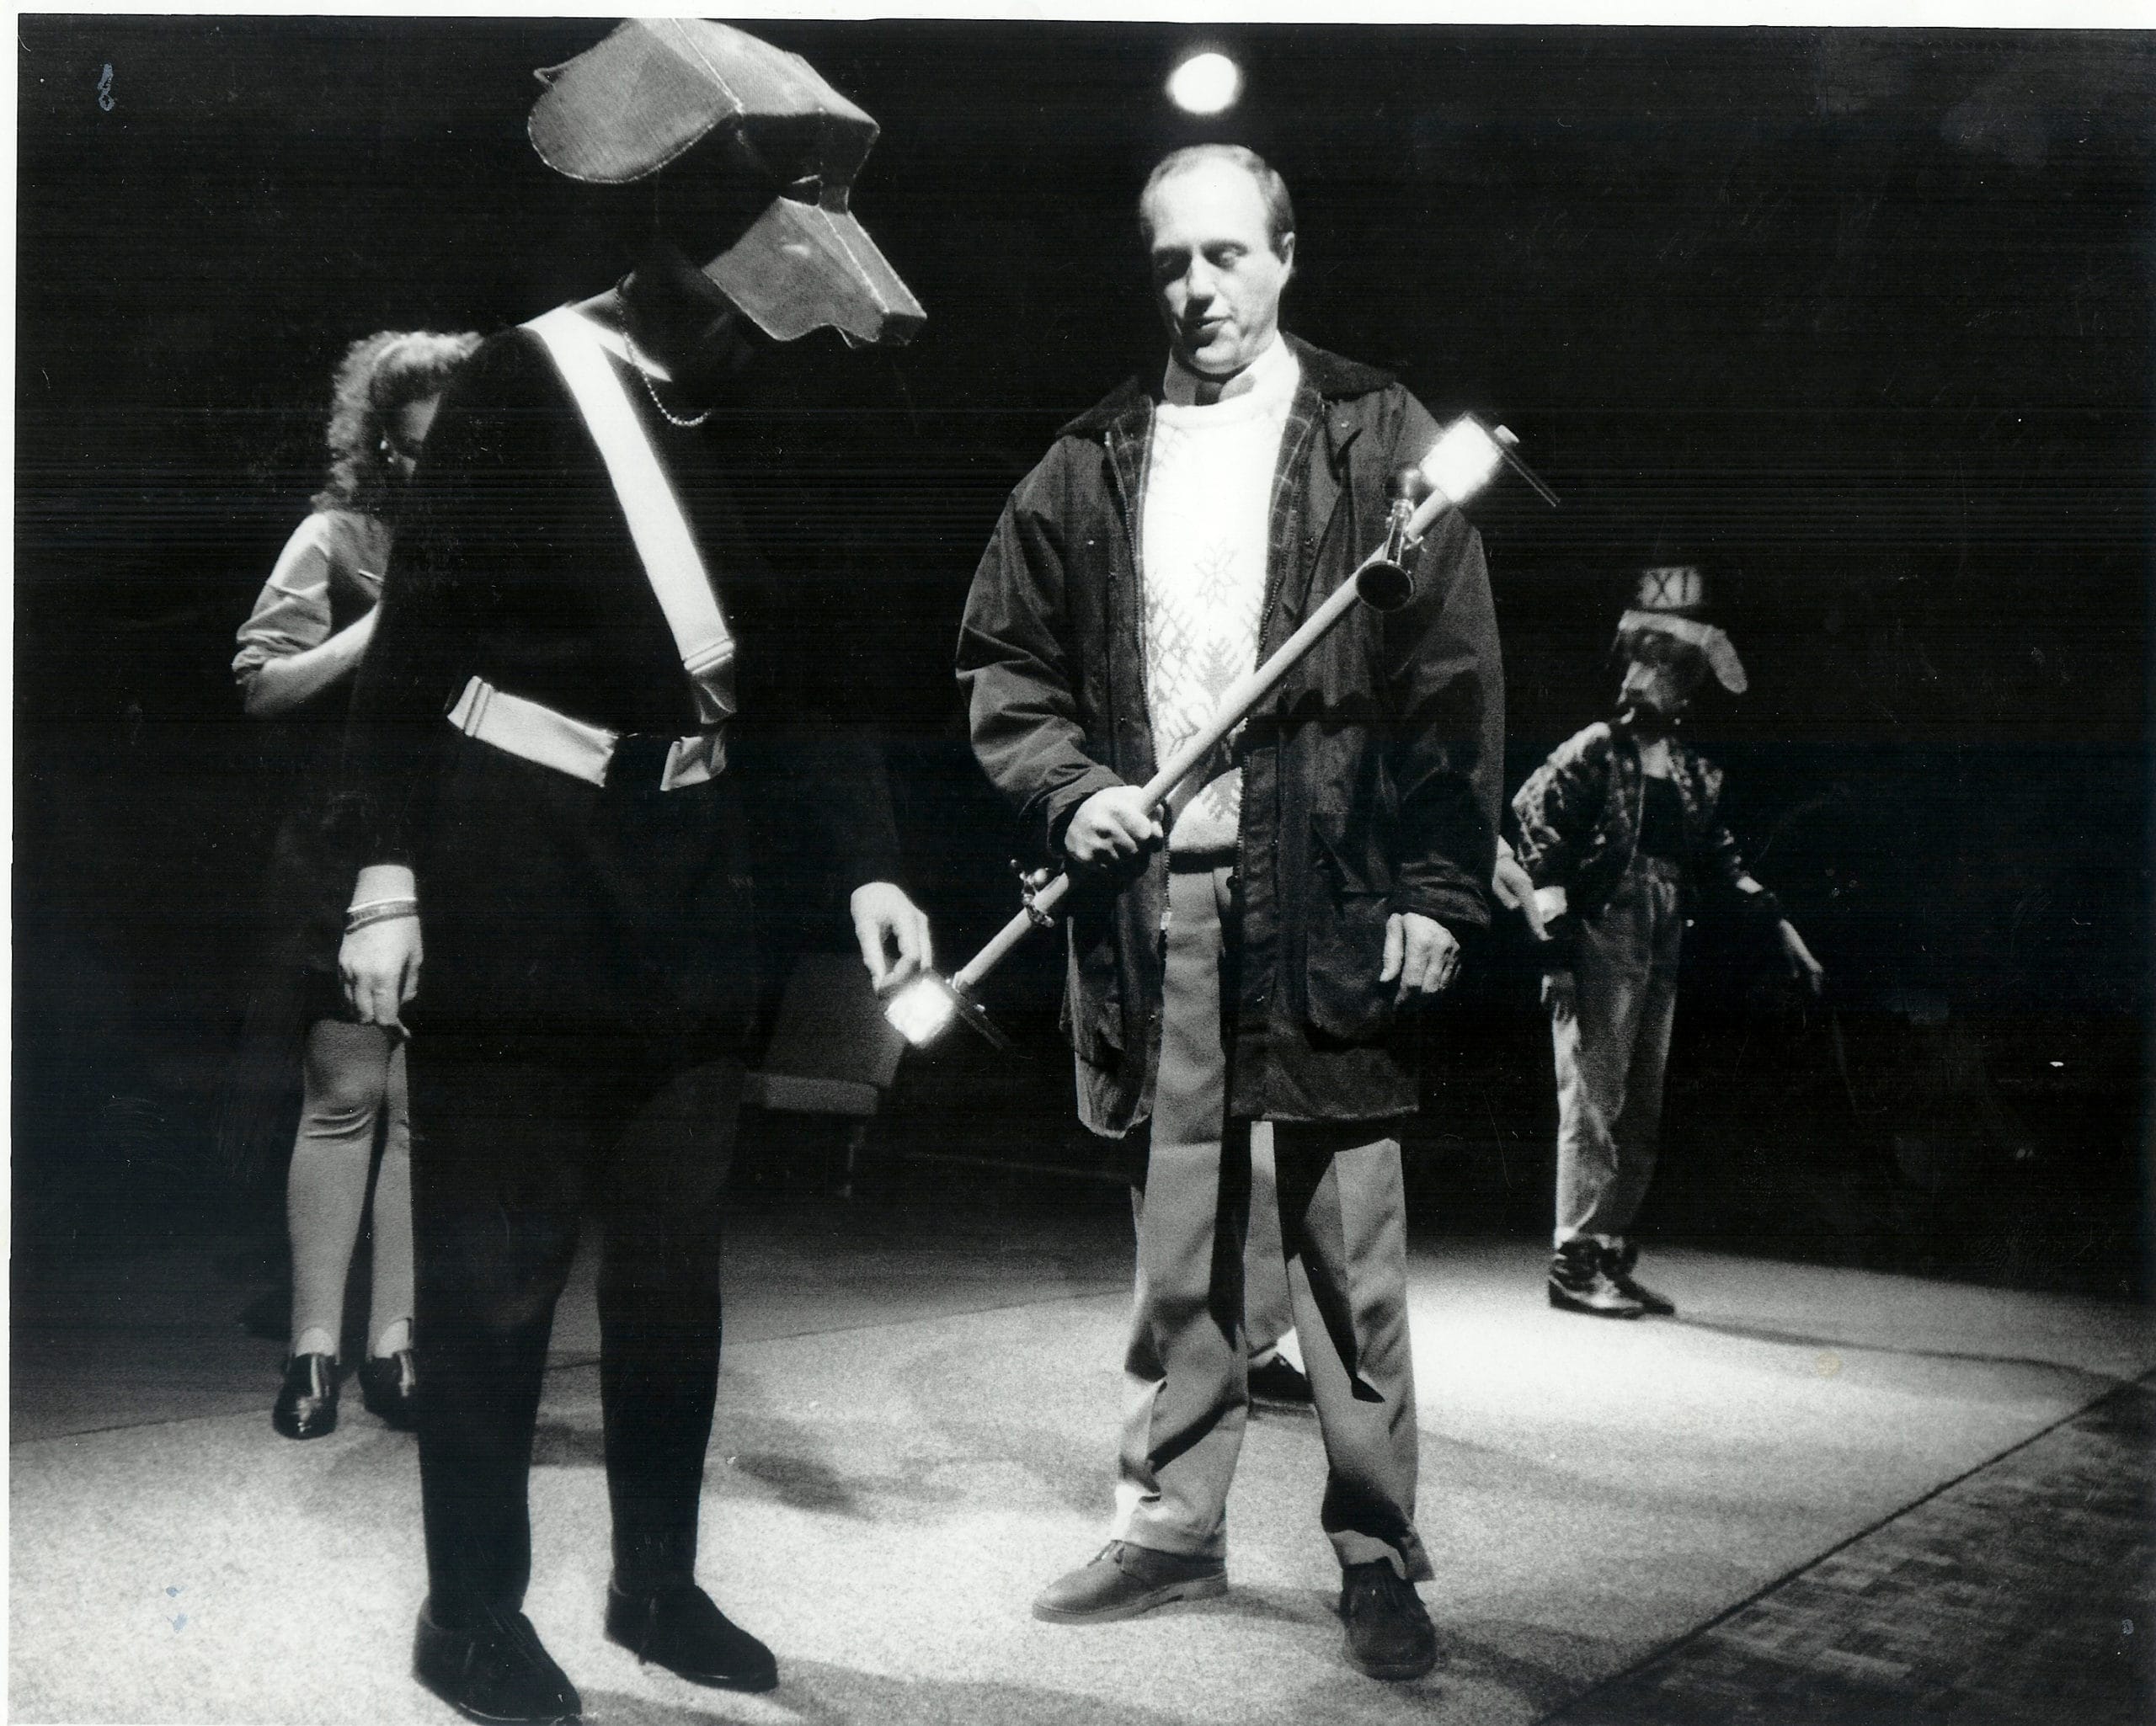 Two performers onstage. One is wearing a large structure on their head, in the shape of a dog. The other is dressed wearing a large woolen jumper and a wax jacket.